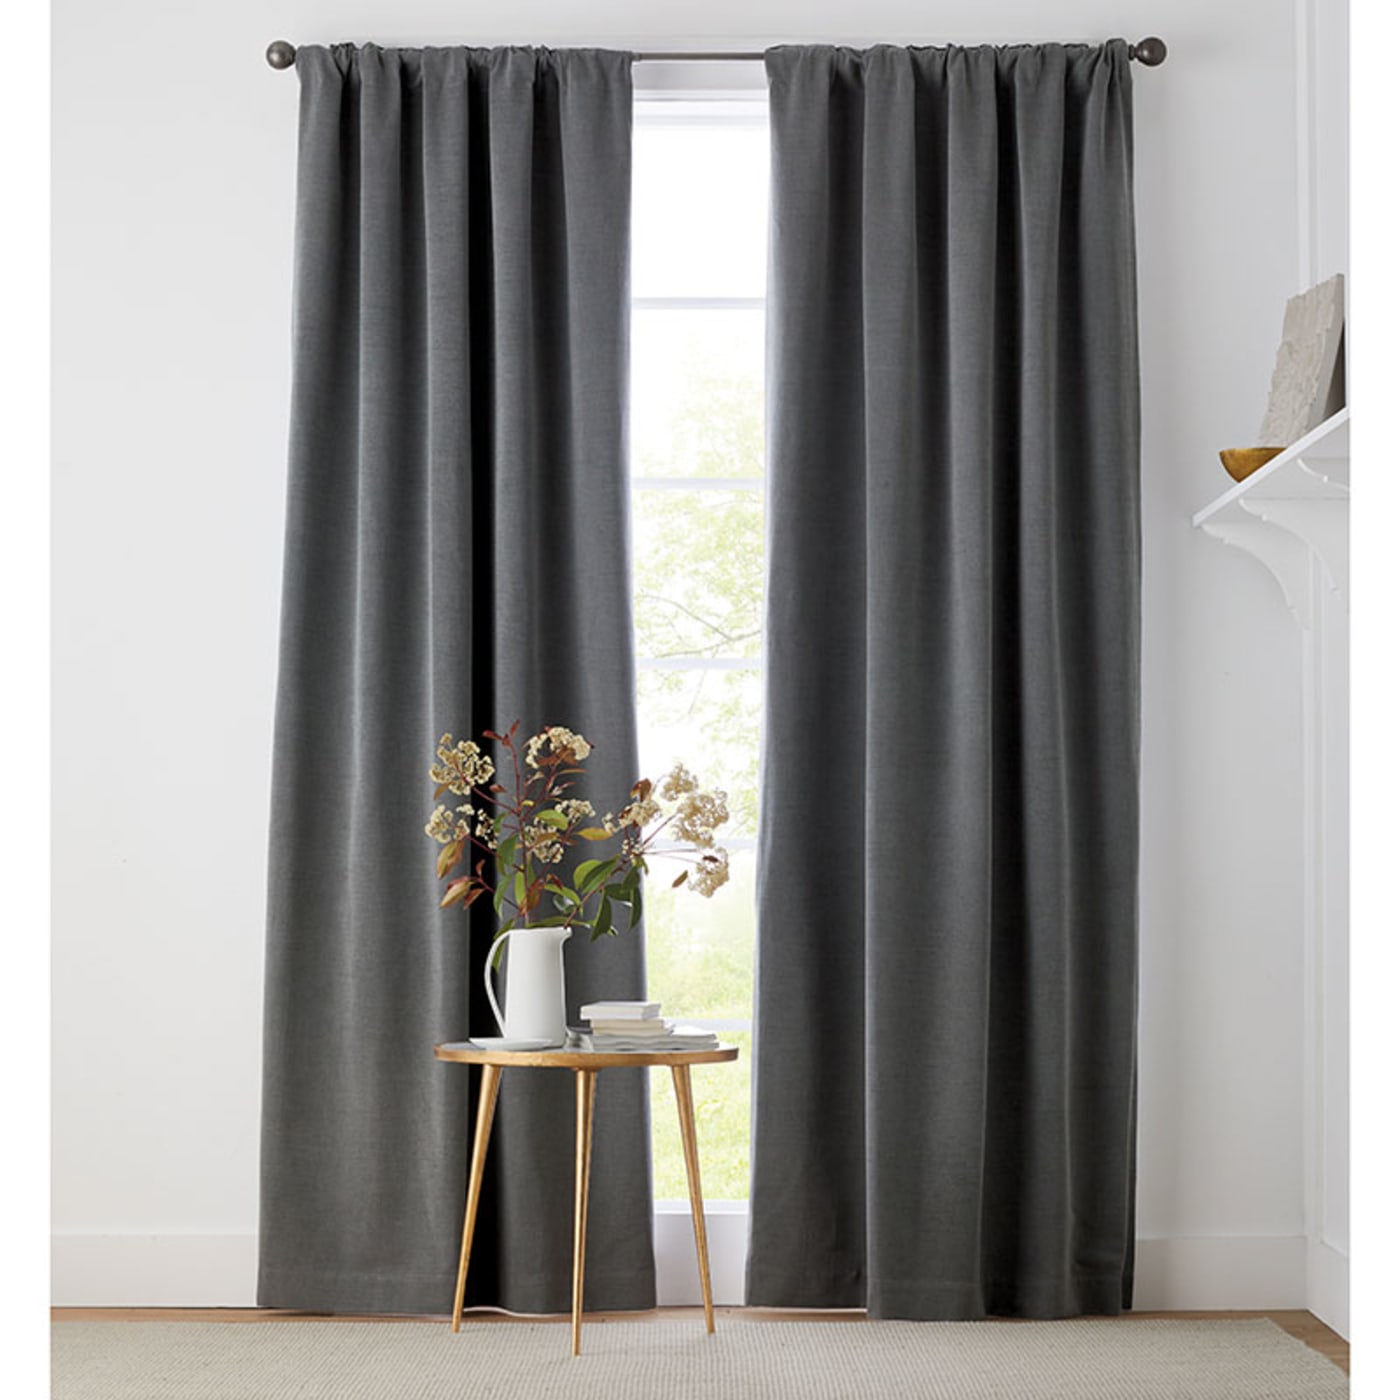 Emery Textured Window Curtain, Cotton or Light Blocking Lining | The Company Store